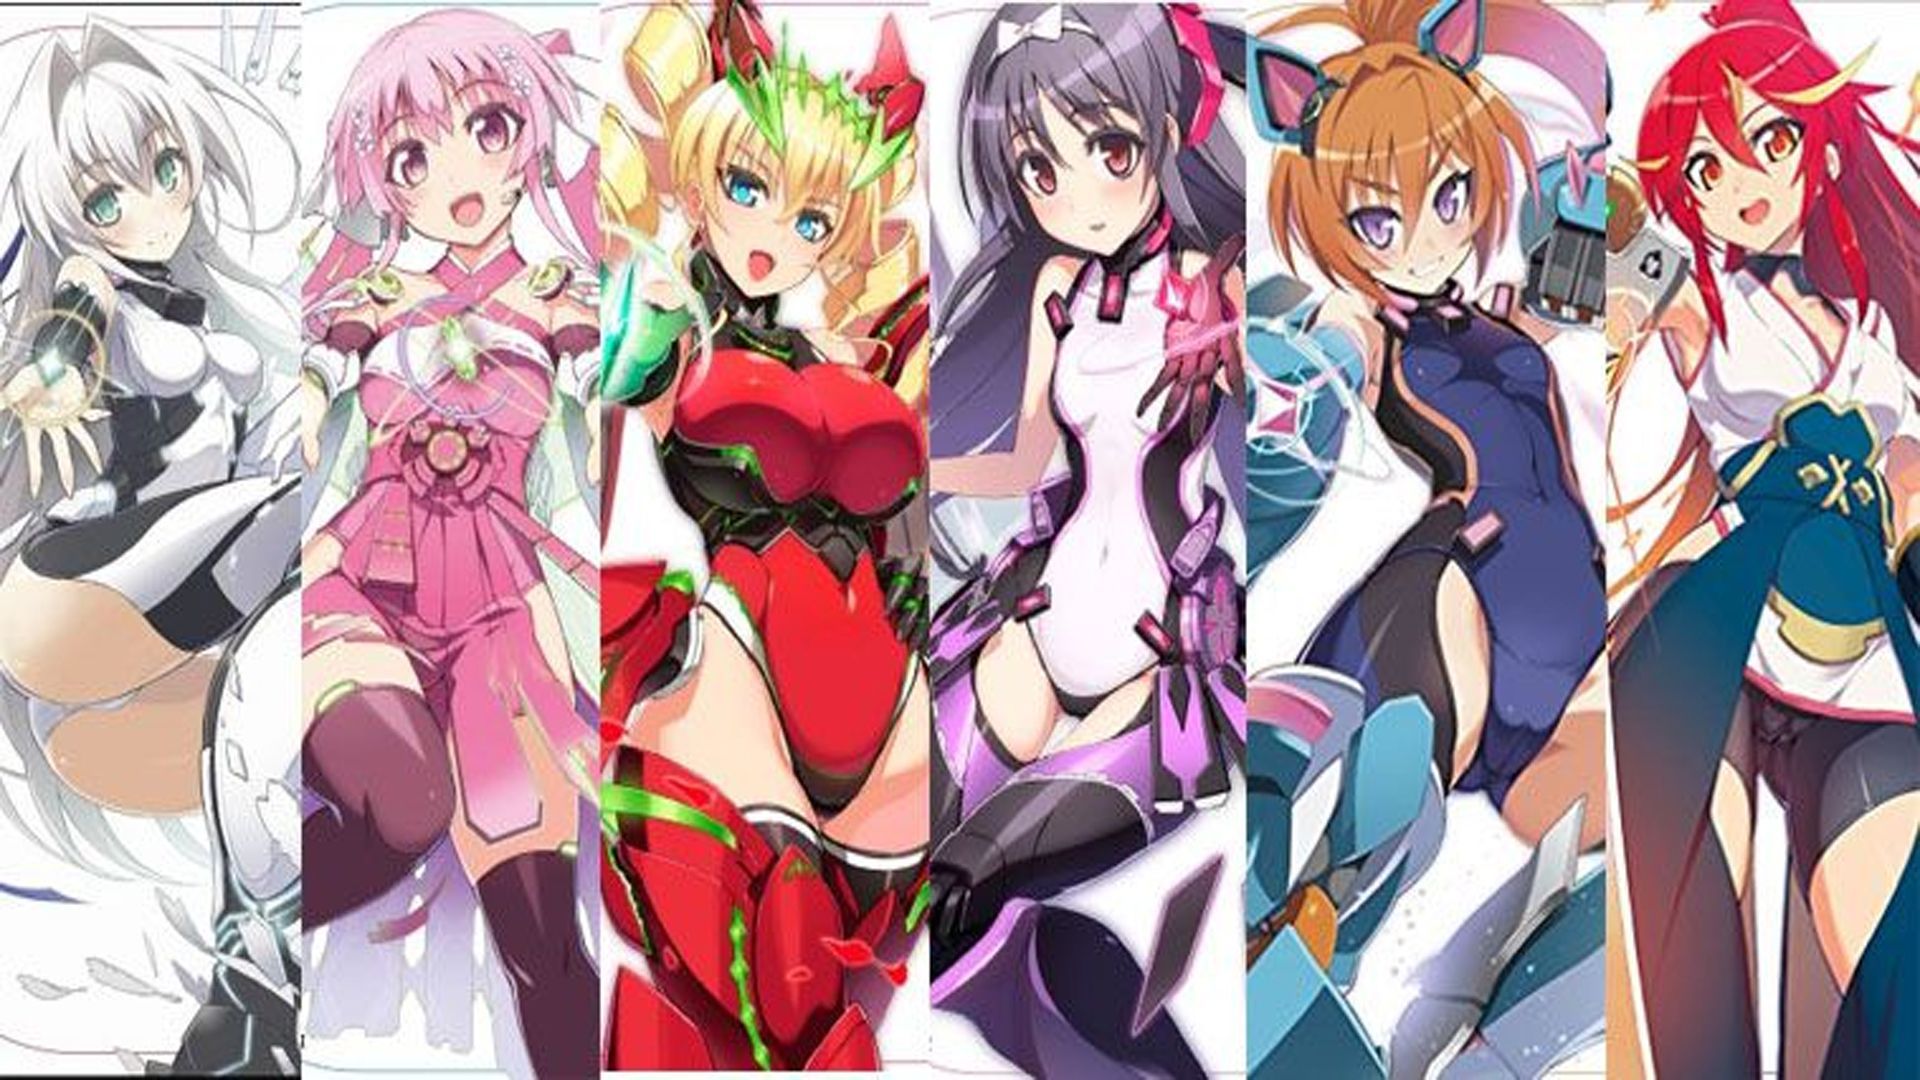 Hundred Anime Female Characters - HD Wallpaper 